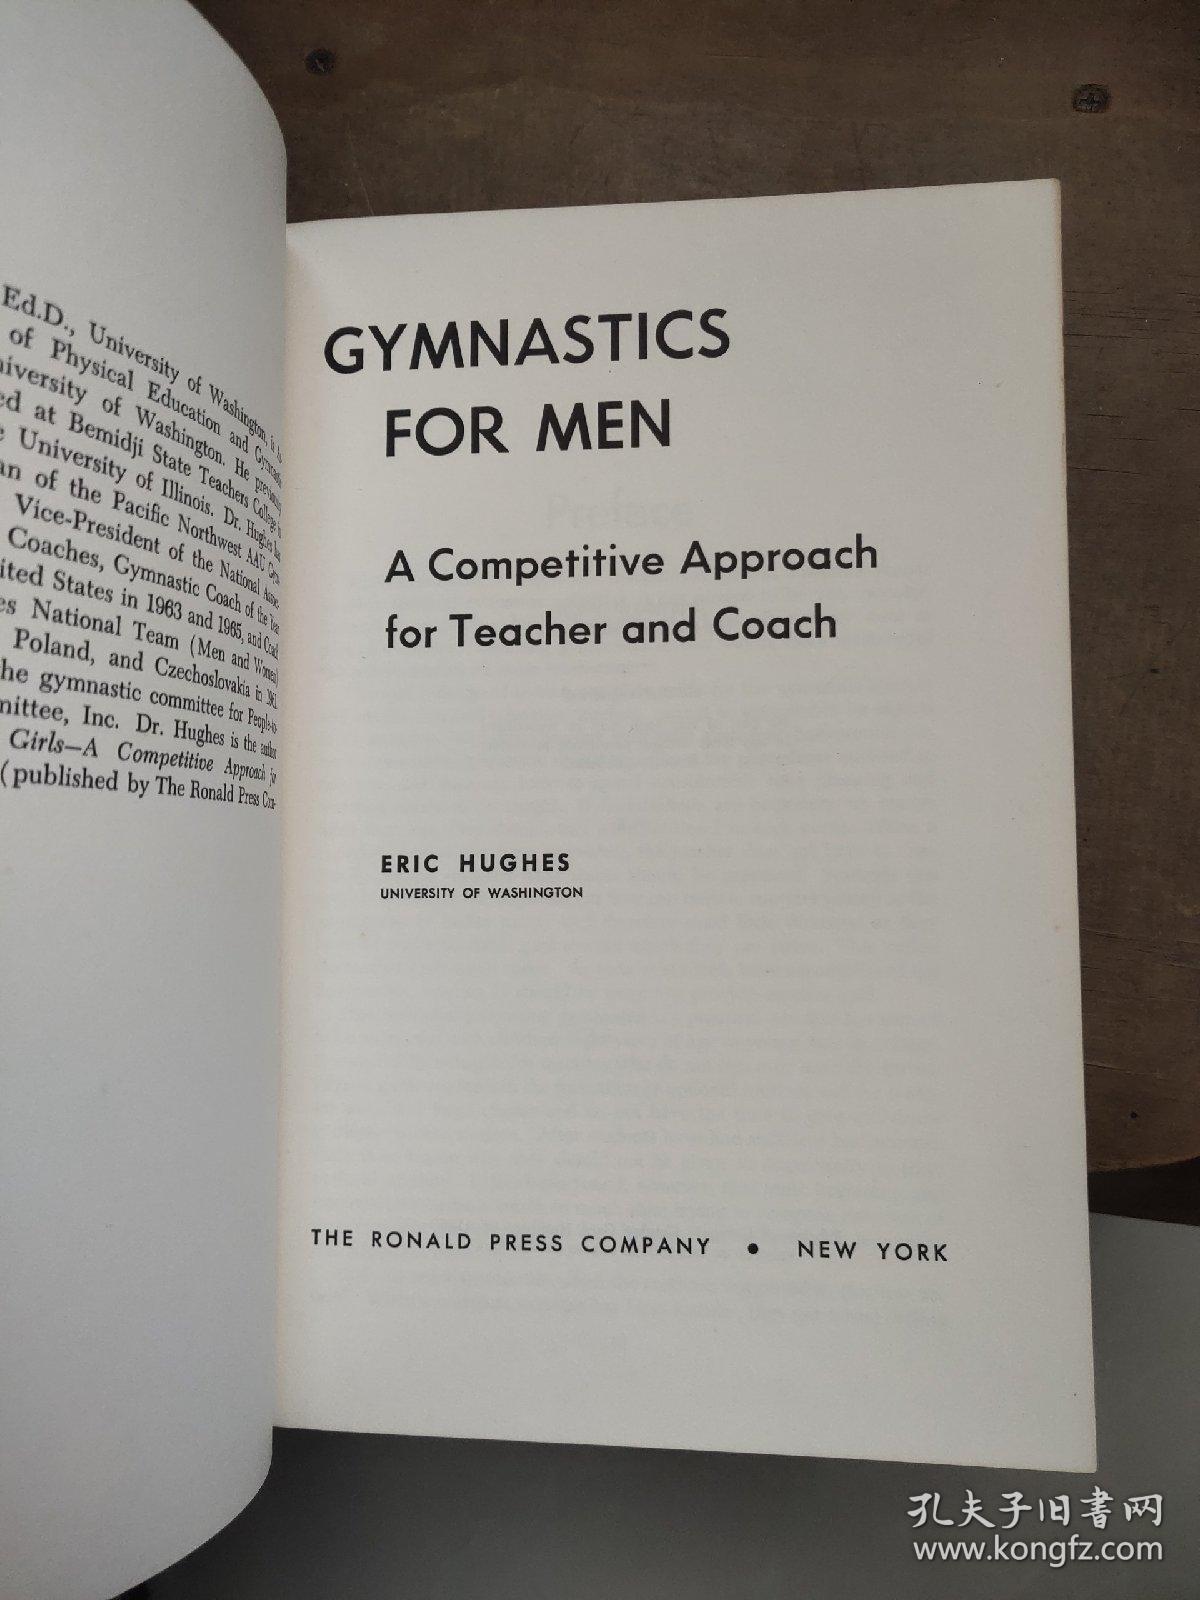 GYMNASTICS FOR MEN ：A  Competitive Approach for Teacher and Coach 英文原版 图文册〈 男子体操 训练方法〉布面精装16开 纸张好 厚重册册